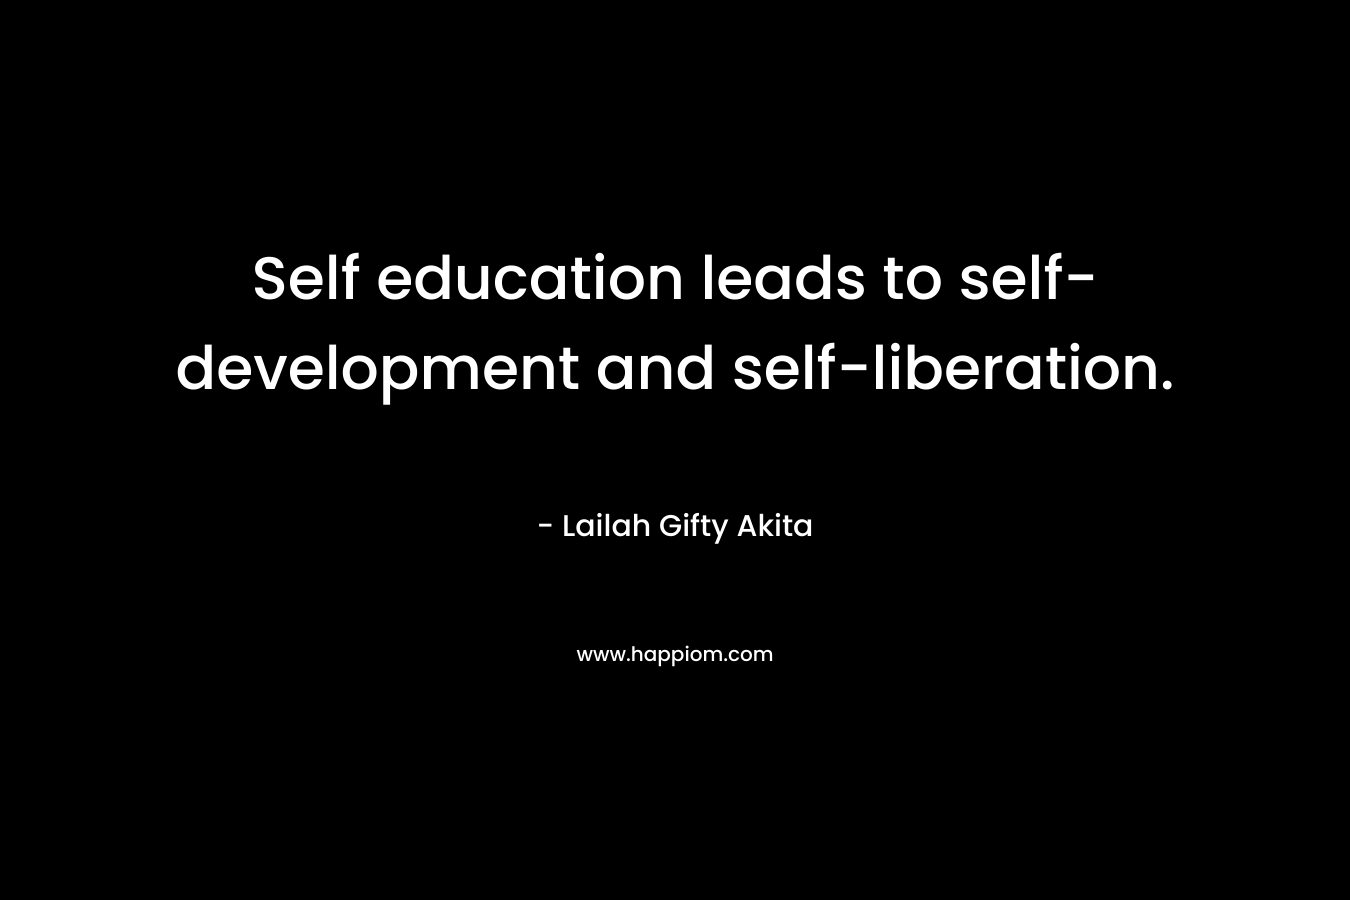 Self education leads to self-development and self-liberation.